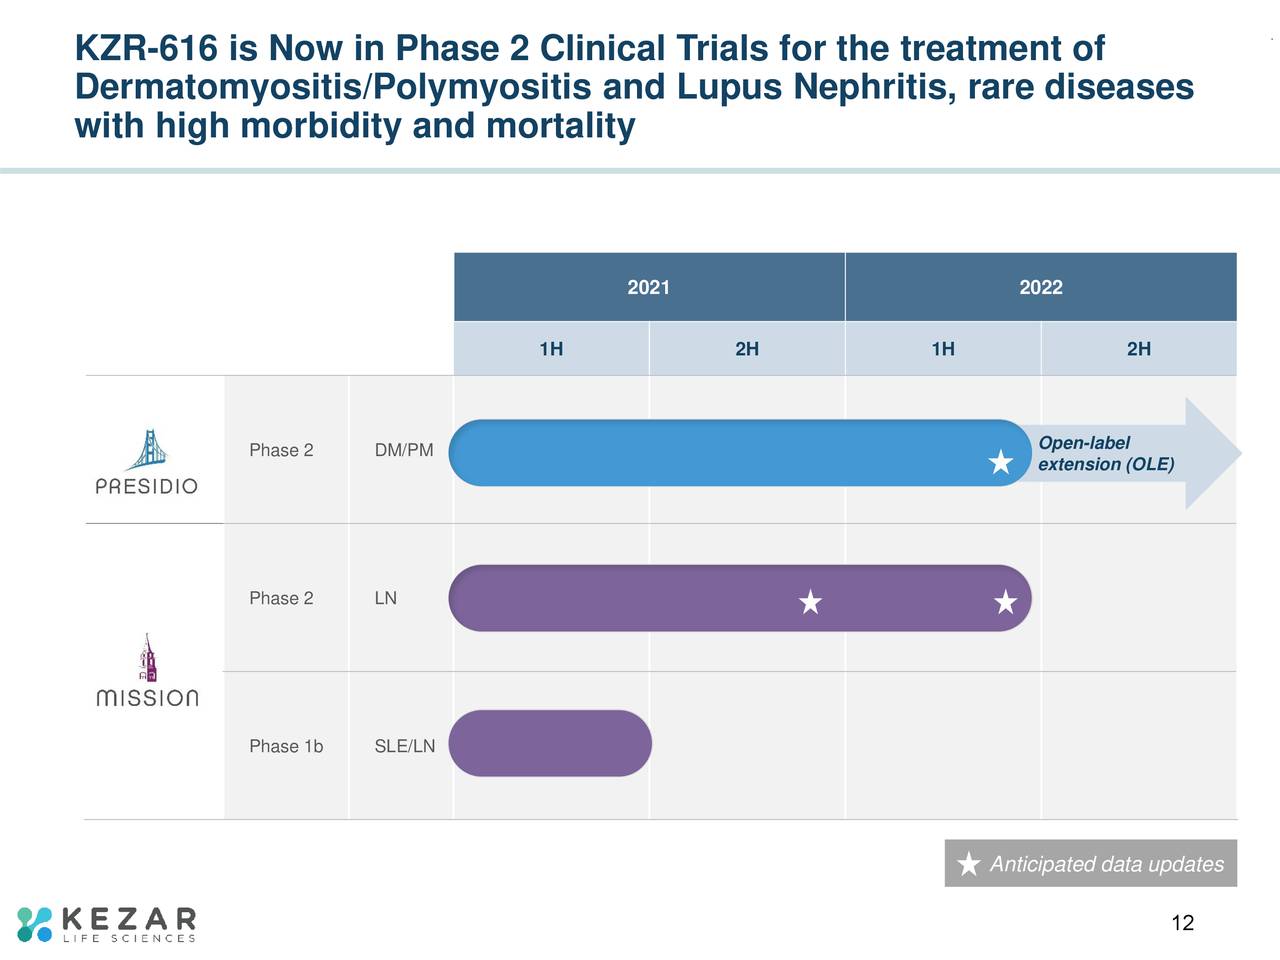 KZR-616 is Now in Phase 2 Clinical Trials for the treatment of